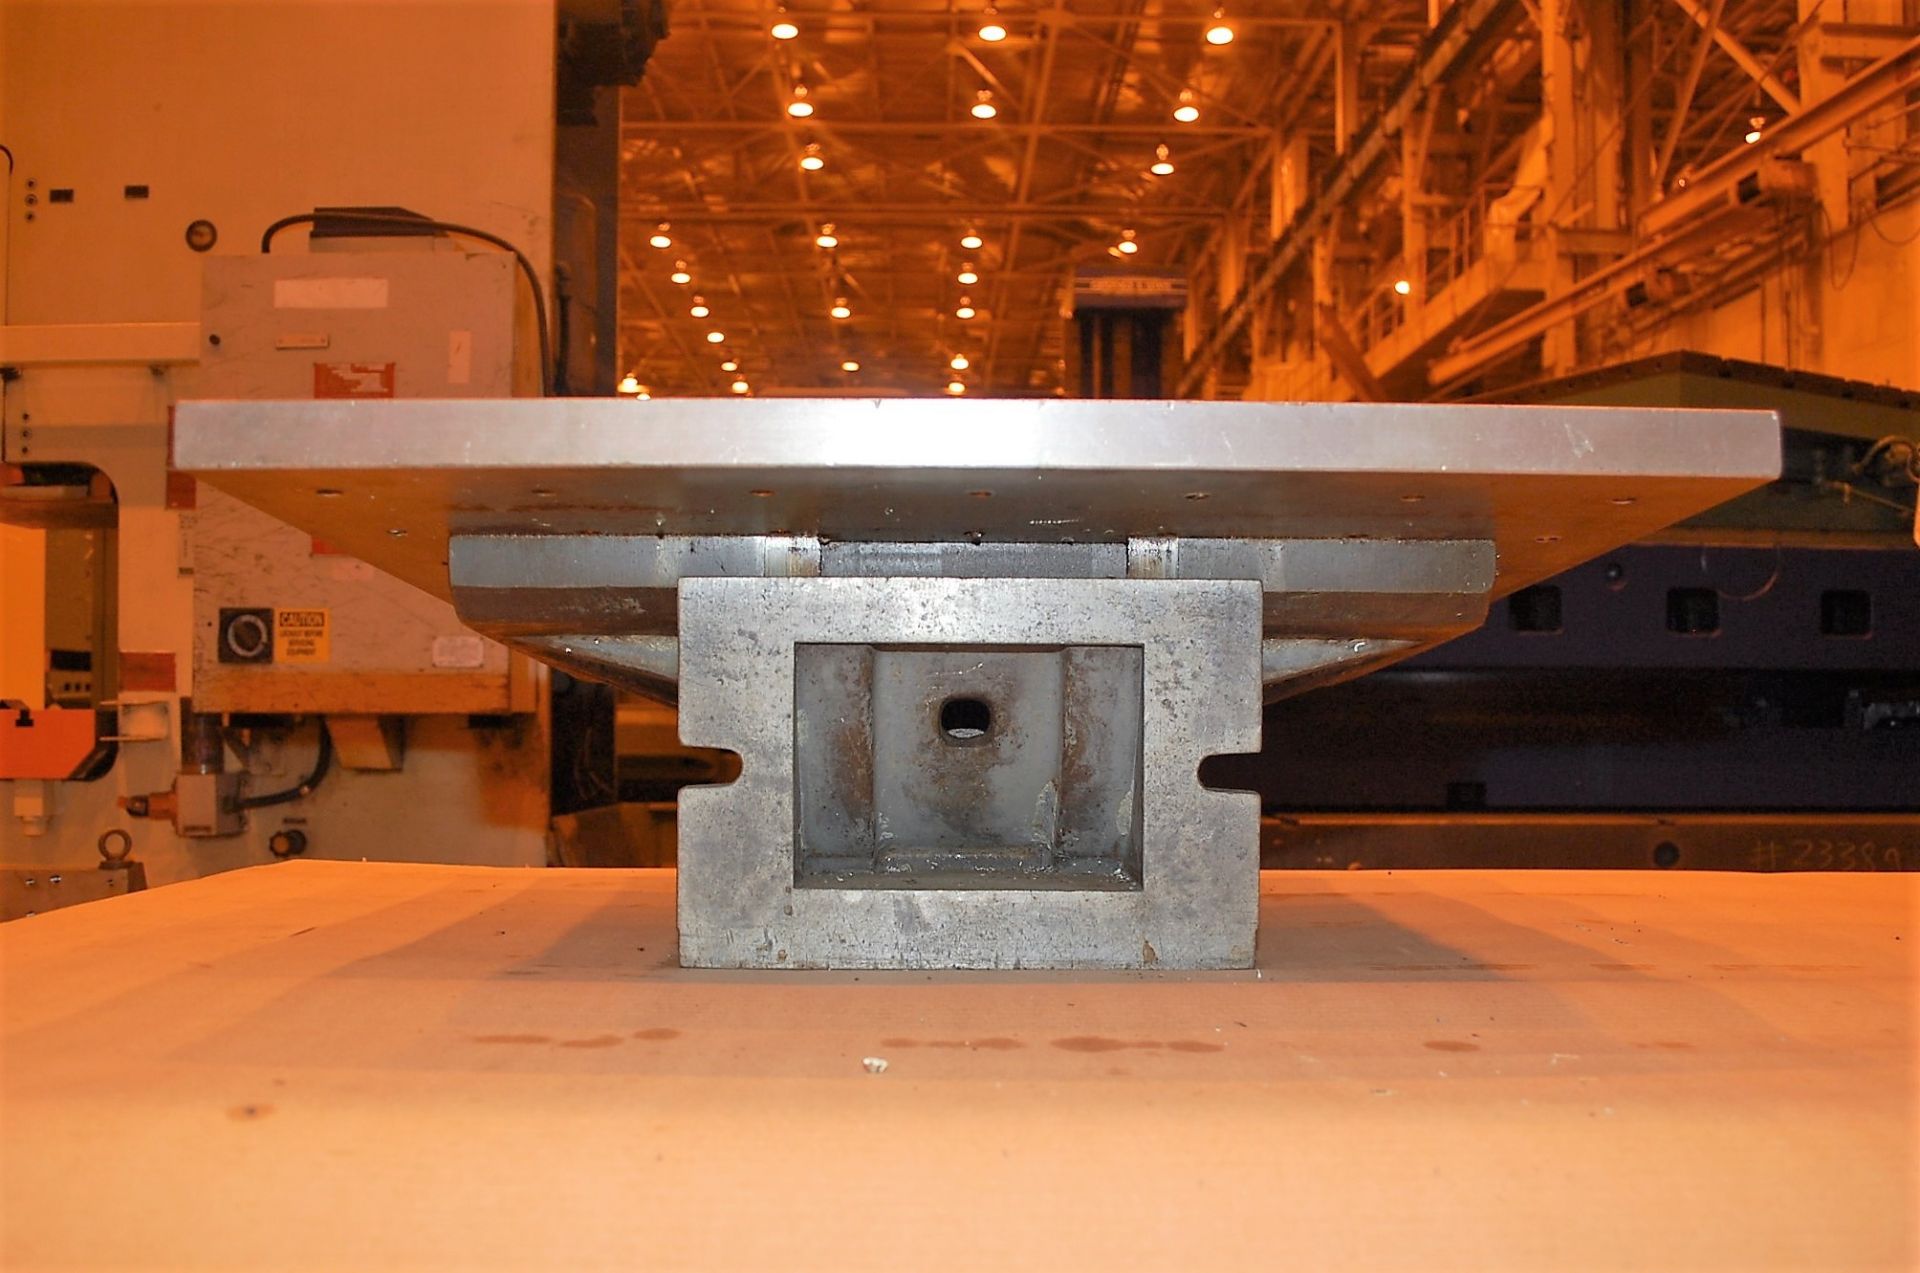 T-Slotted Tilting Table, 21.5" x 15", 0-90 Degree Tilt, with 27.5" x 24.5" Drilled & Tapped Aluminum - Image 4 of 6